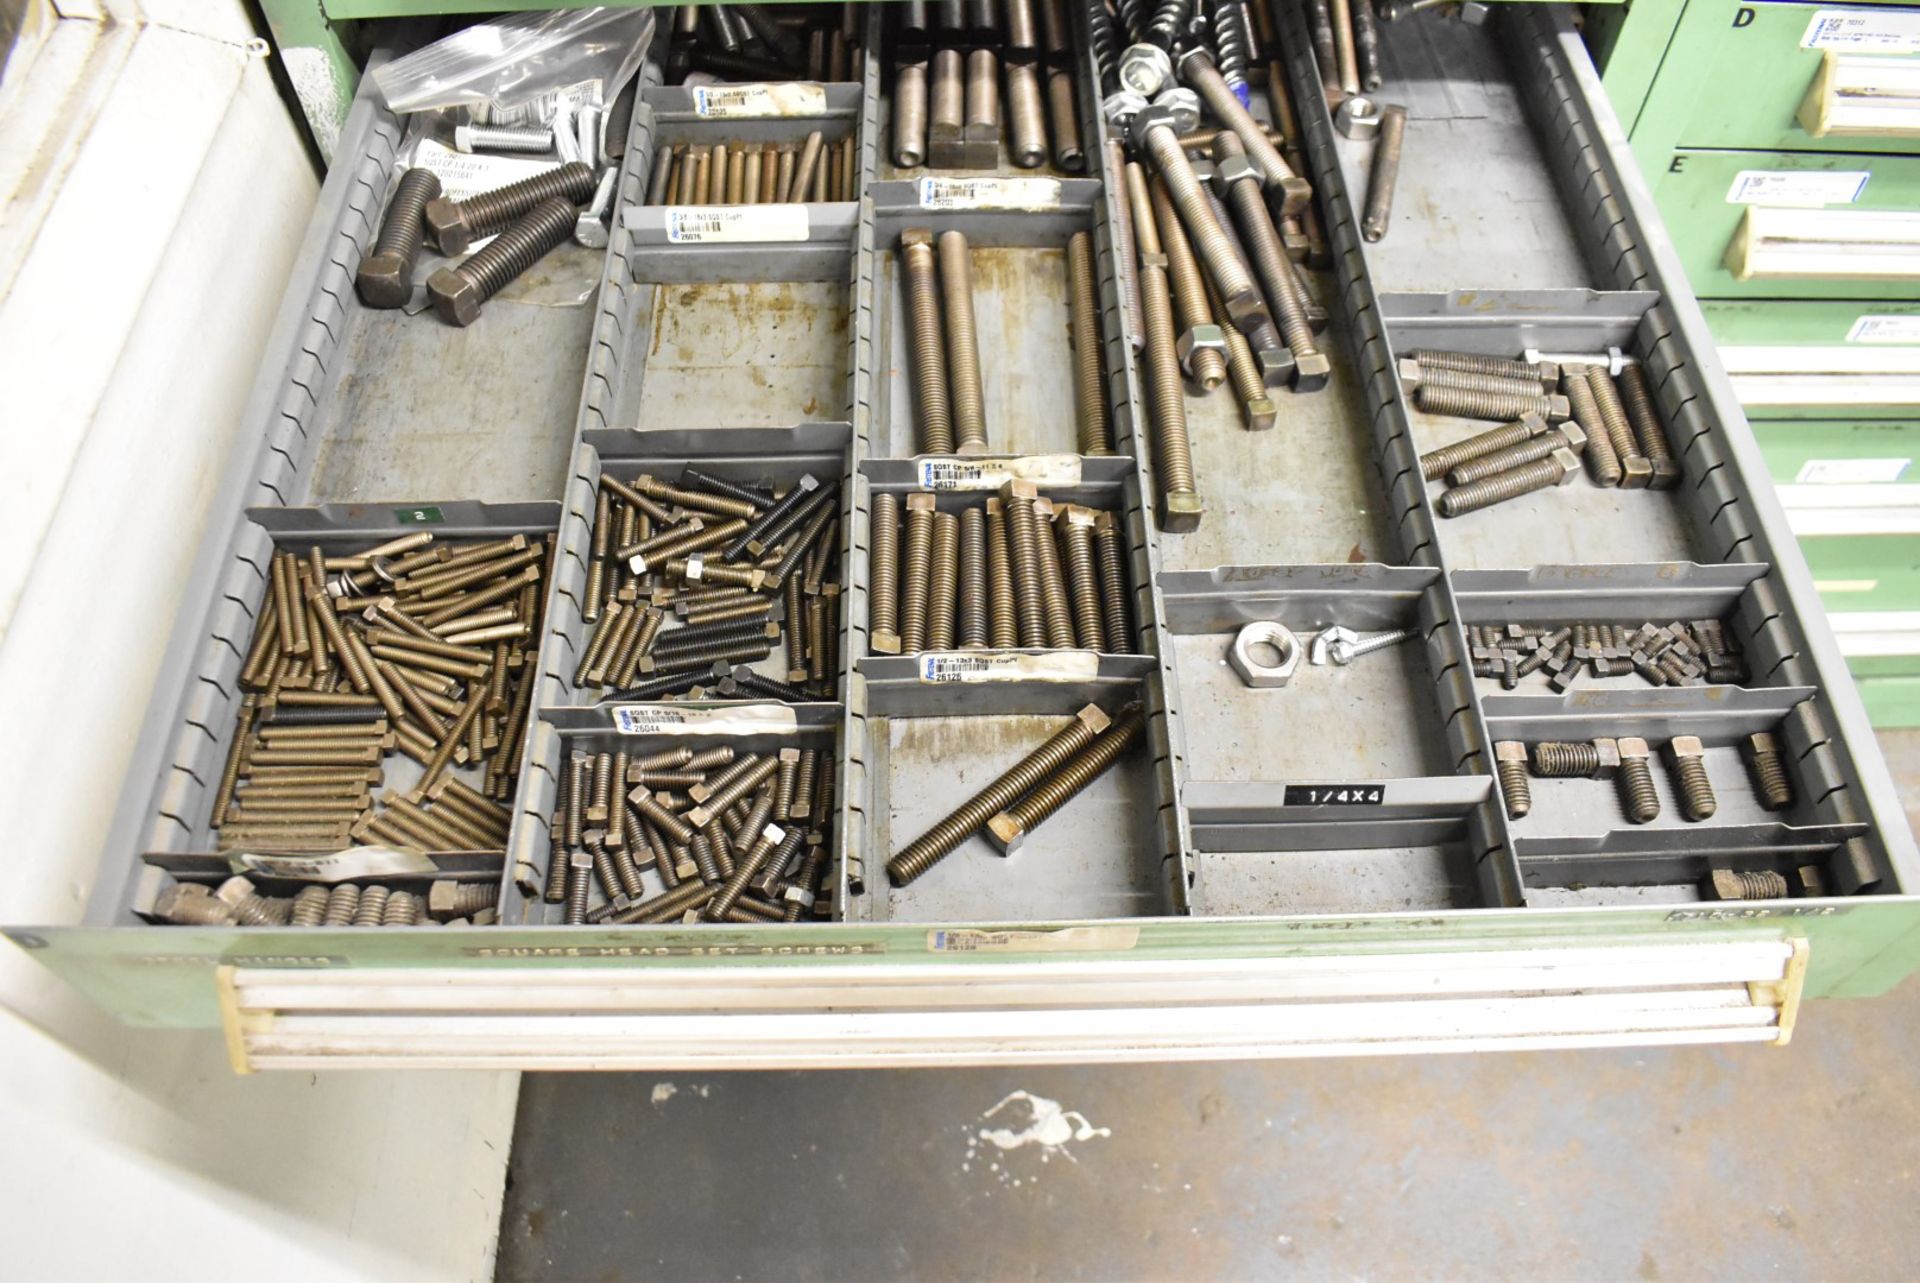 LOT/ CONTENTS OF CABINET - INCLUDING STAINLESS STEEL HARDWARE, HARDWARE, SET SCREWS (TOOL CABINET - Image 5 of 9